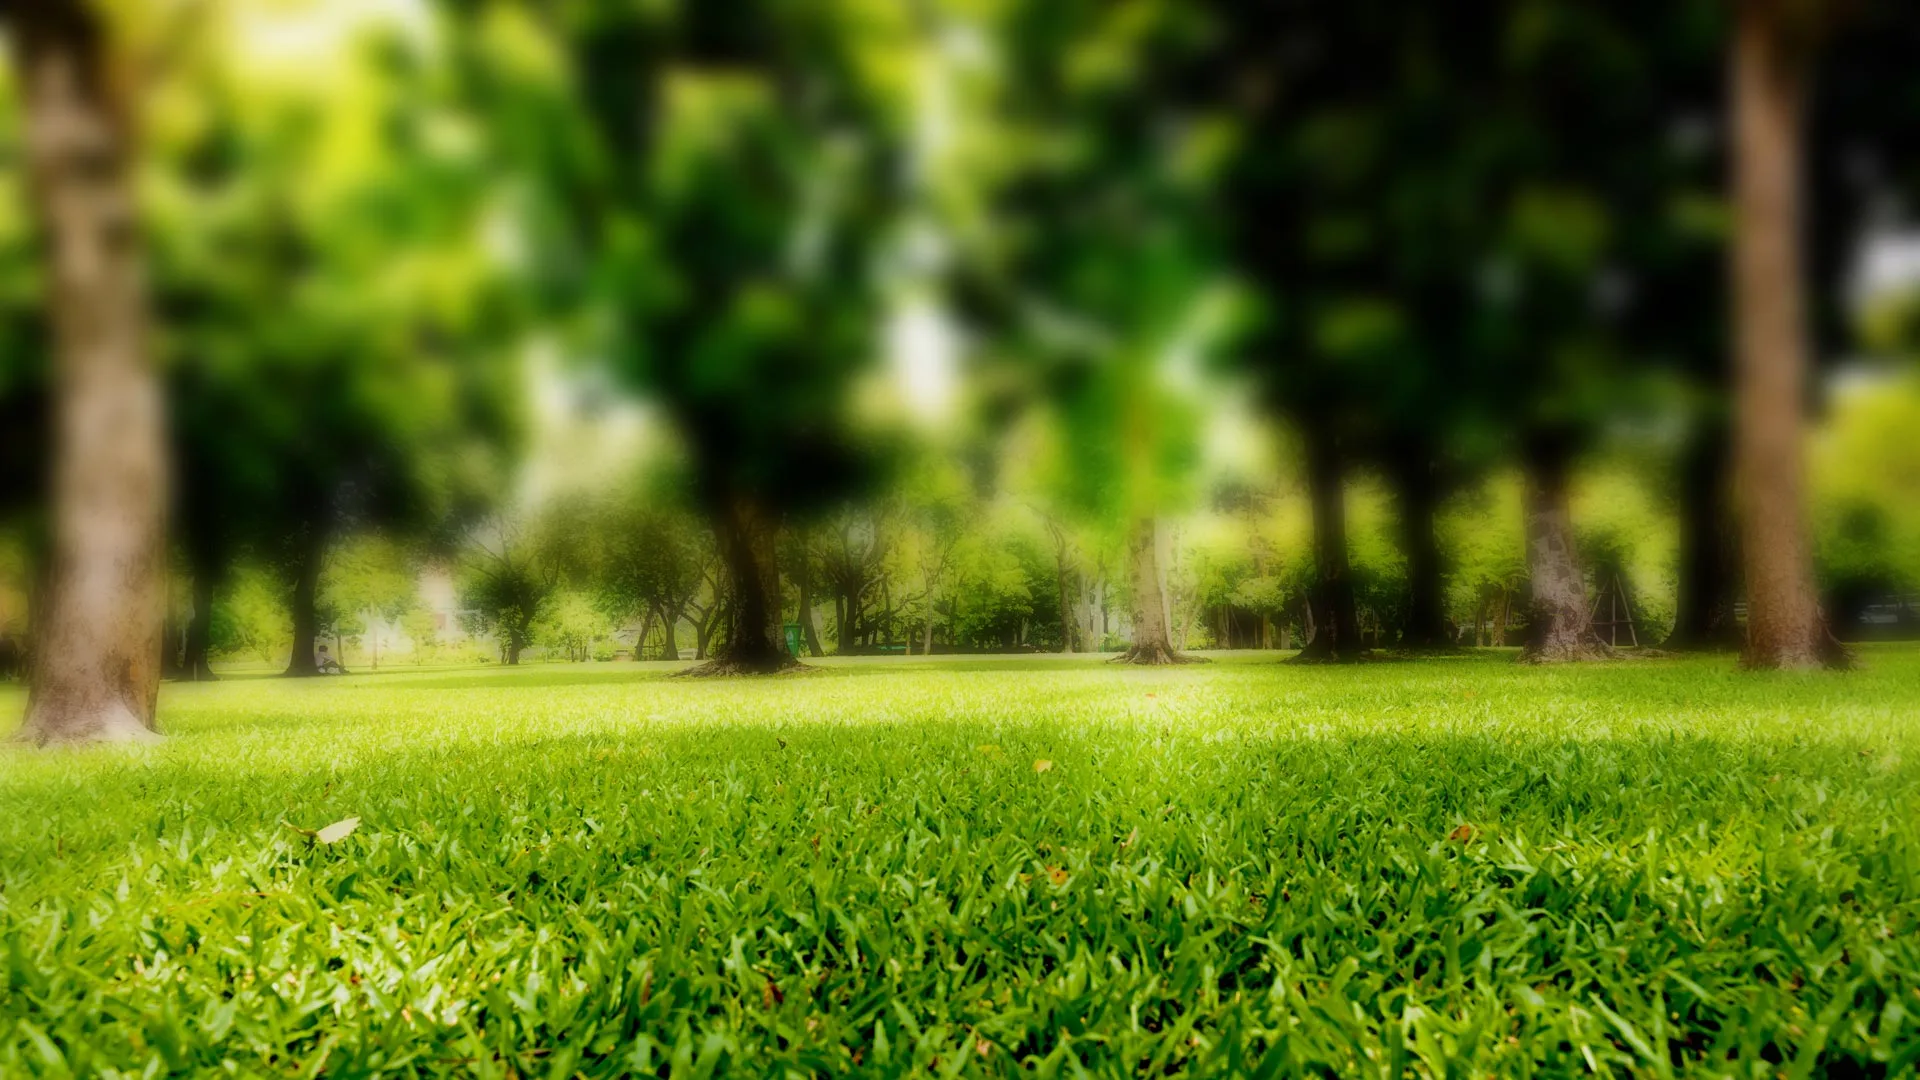 Blurred view of a greenery landscape in a neighborhood in Manchaca, TX.